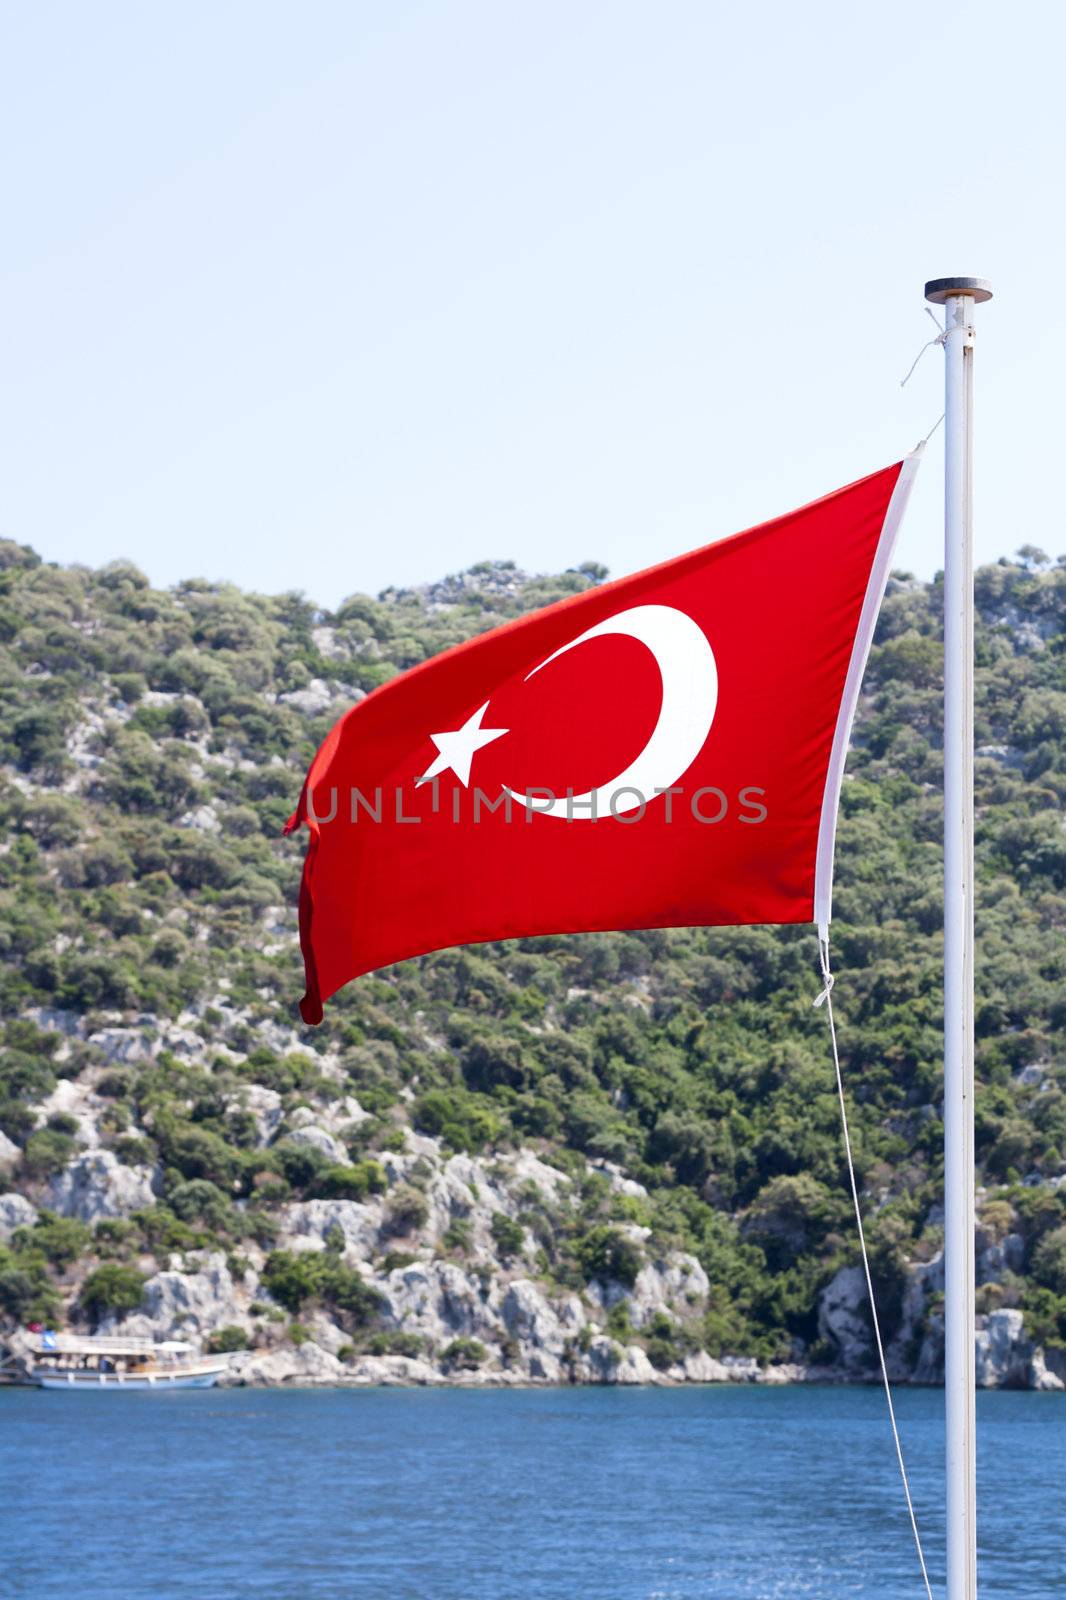 Turkish flag by magraphics